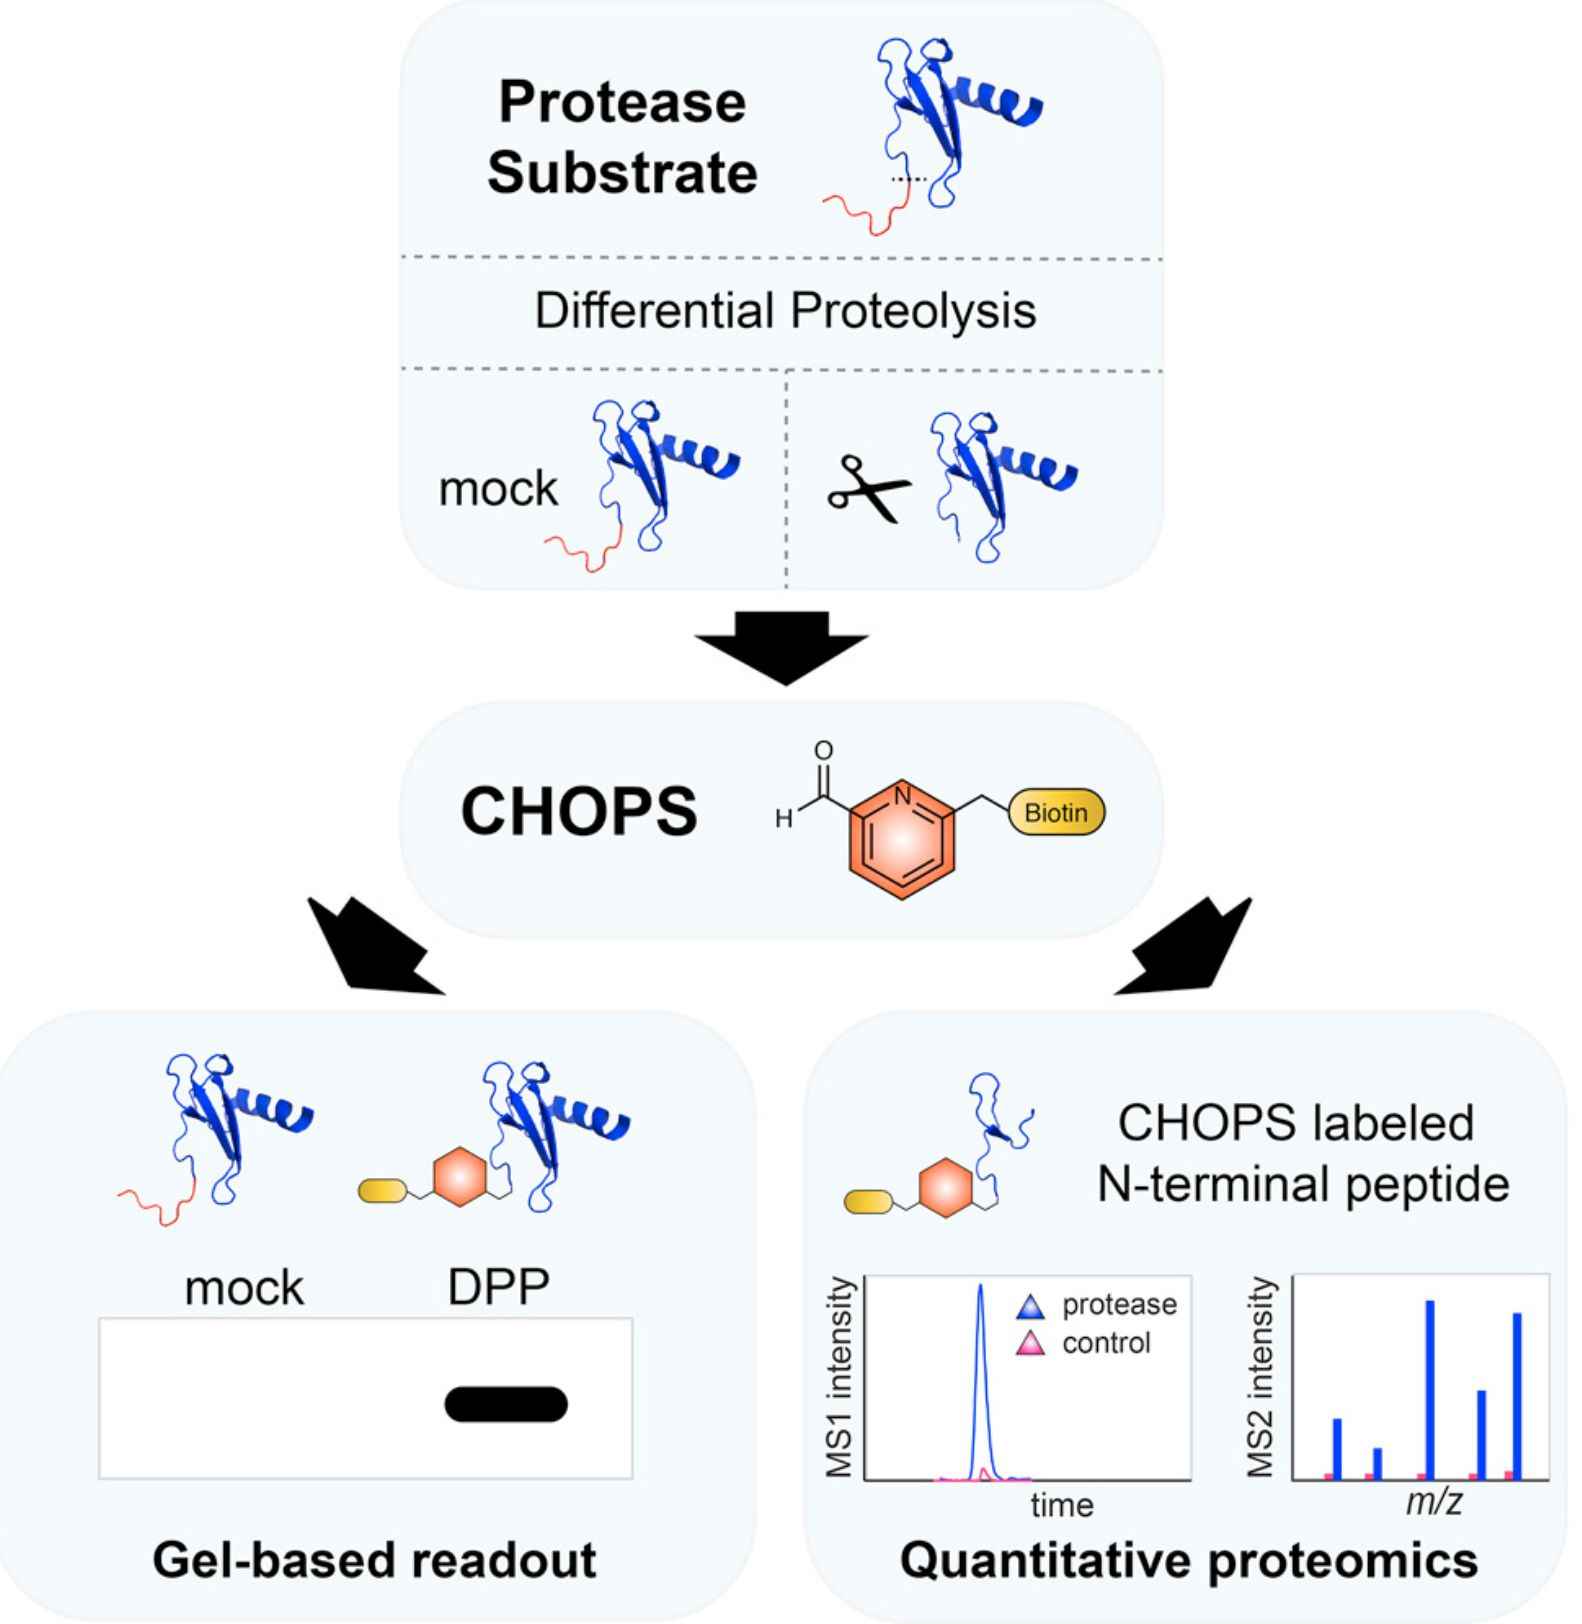 A Chemical Strategy for Protease Substrate Profiling (Andrew R. Griswold, et al., 2019)